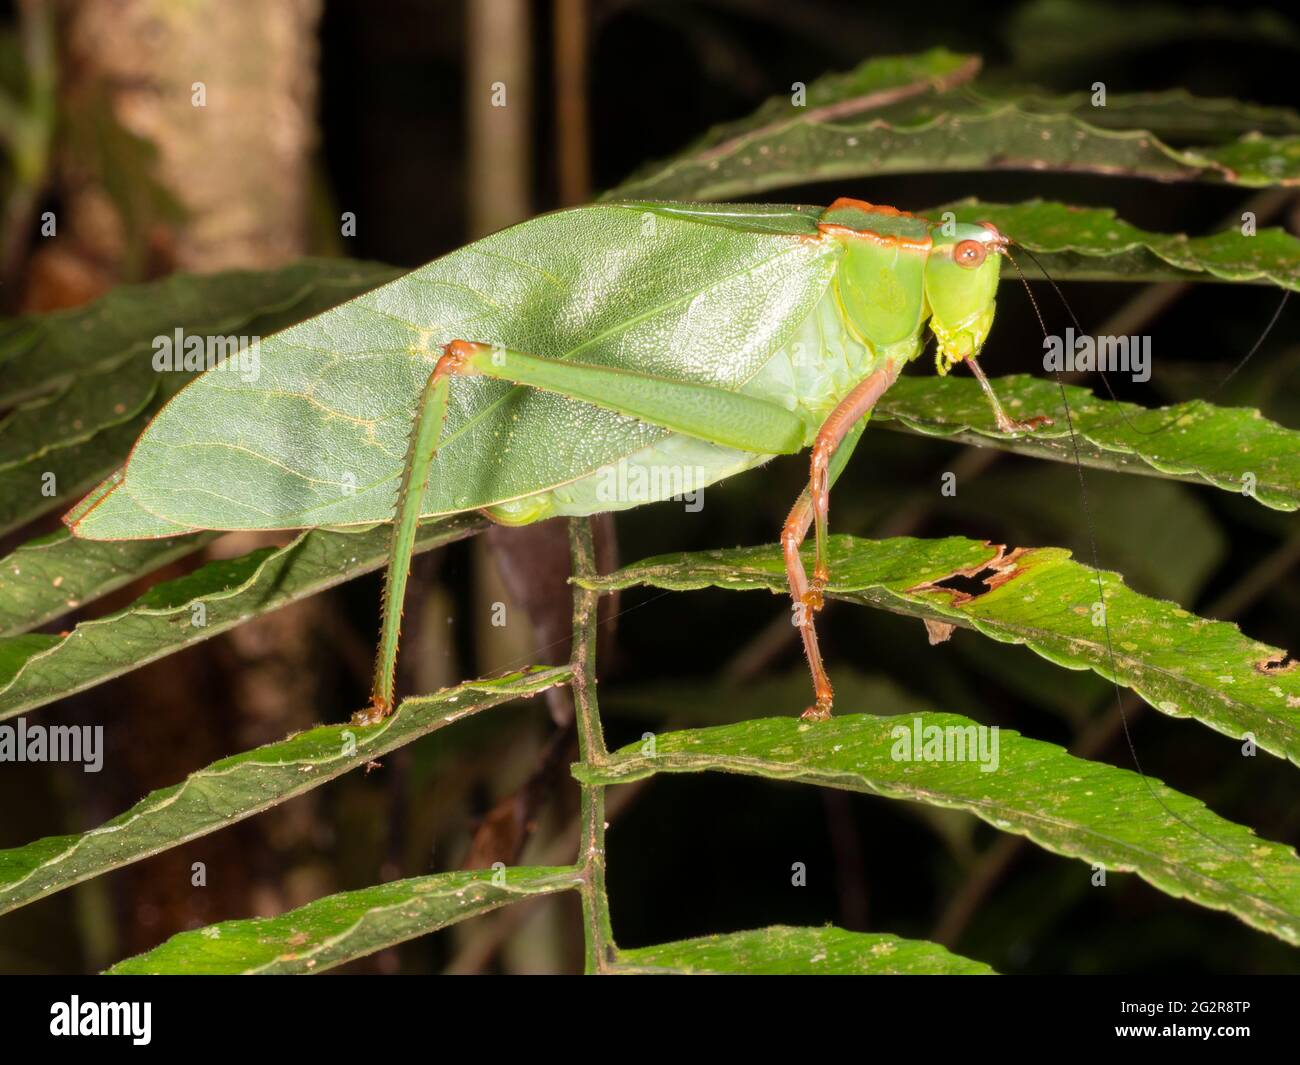 A large green katydid in the rainforest, Napo province, Ecuador Stock Photo